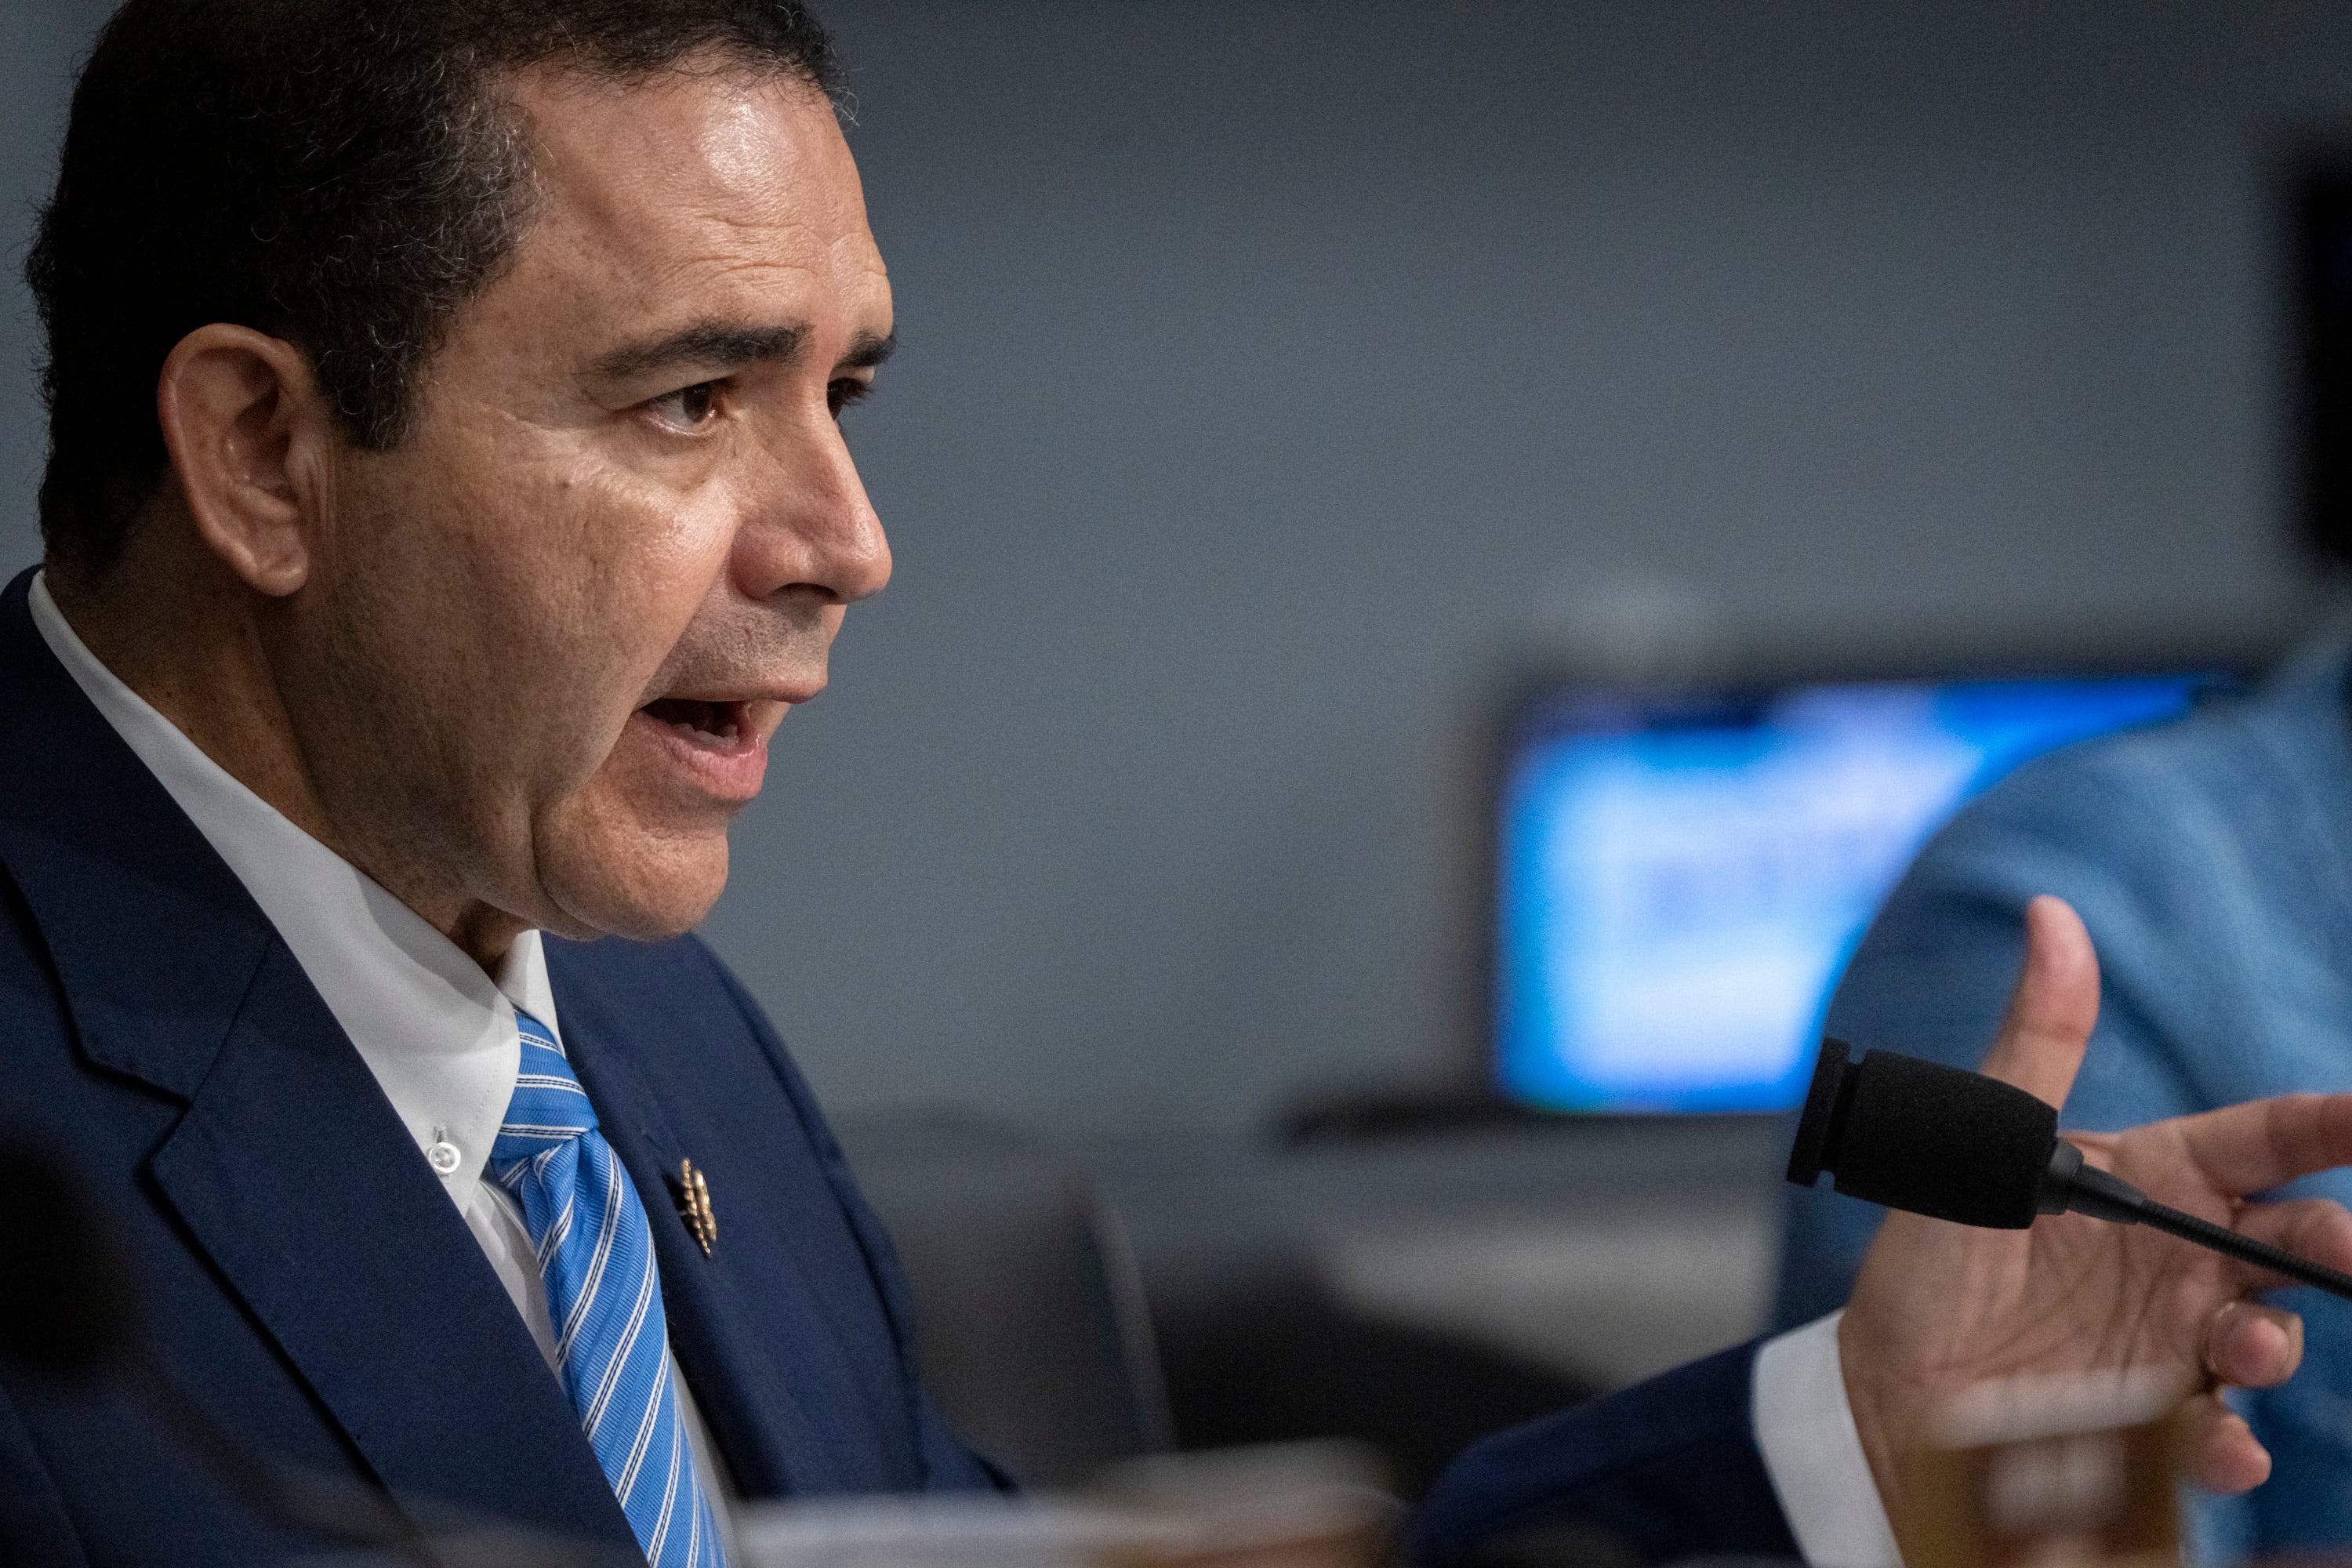 Federal bribery charges filed against Texas Democratic congressman and his wife